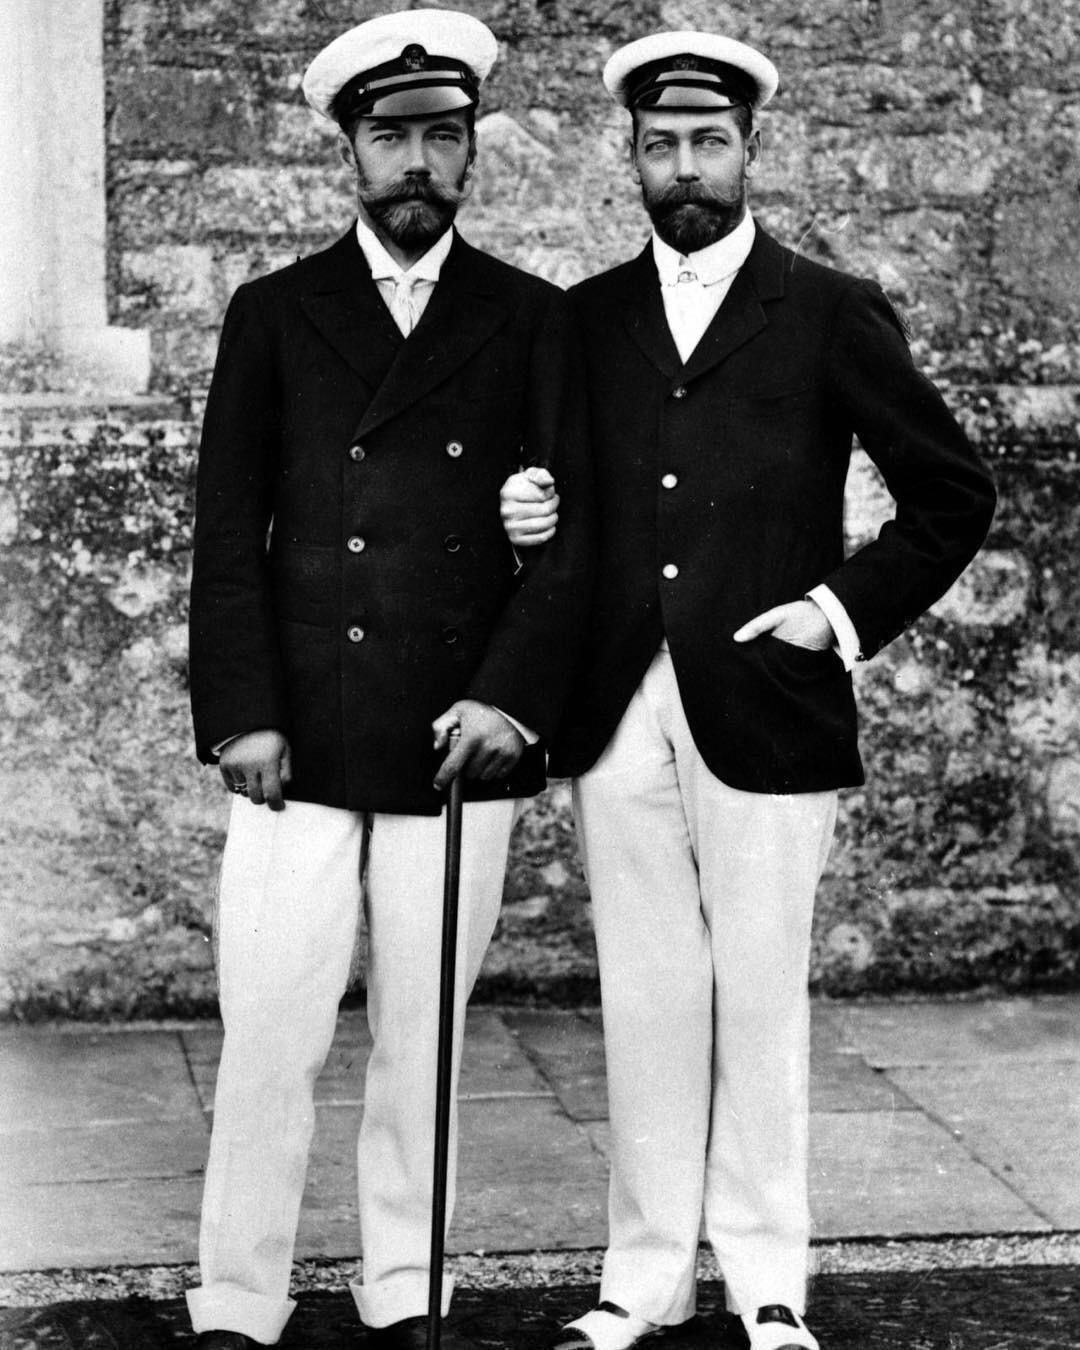 Tsar Nicholas II and his cousin, King George V, in 1904 when Nicholas was on a state visit to England